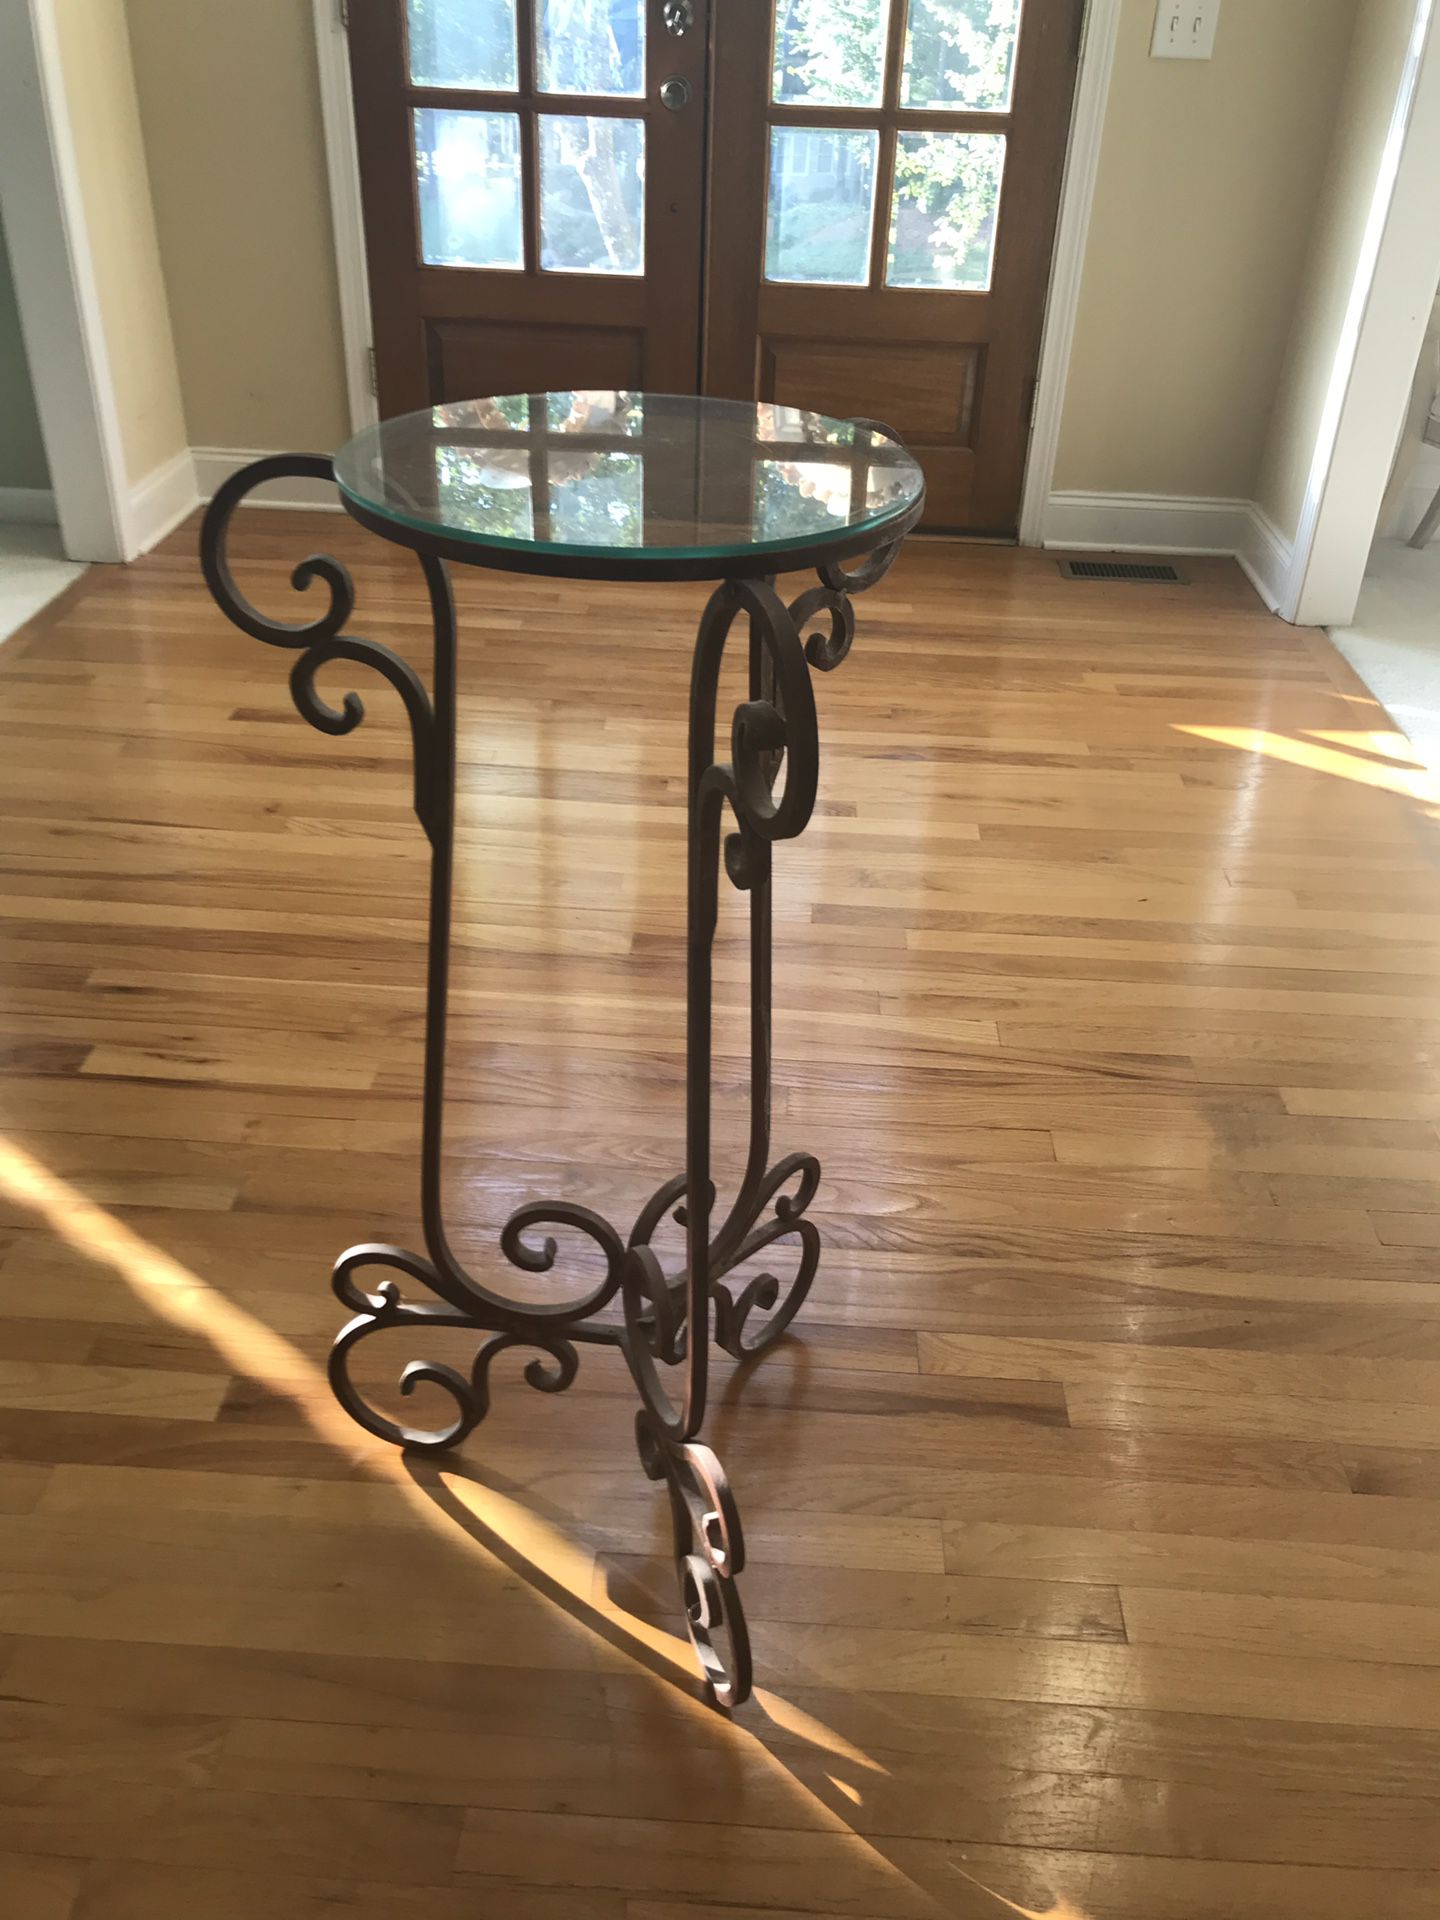 Wrought Iron plant stand